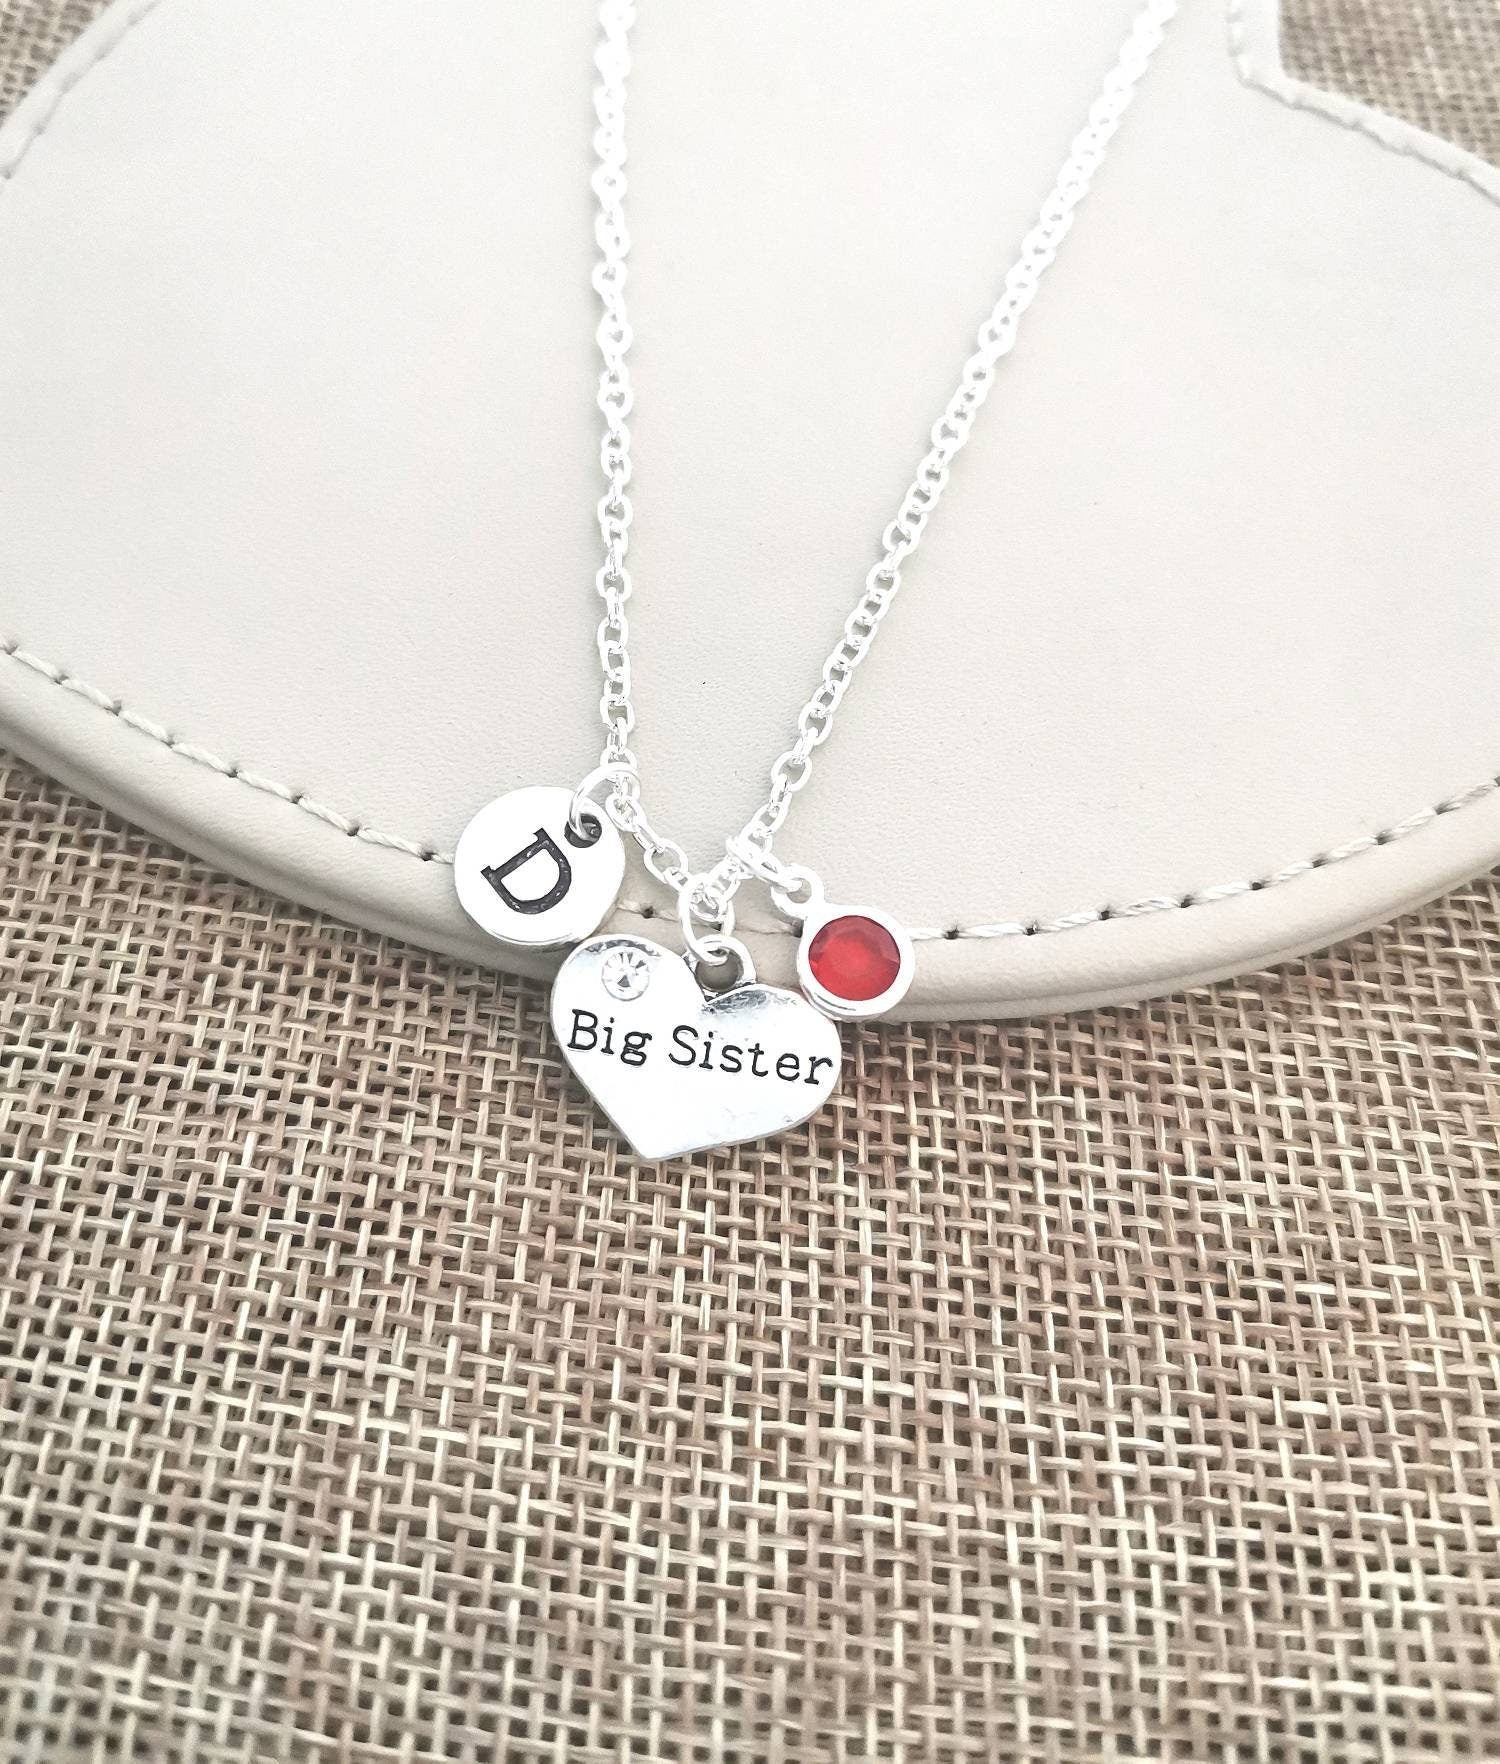 Three Sisters Puzzle Piece Necklace Set, Three Necklaces, Sterling Silver